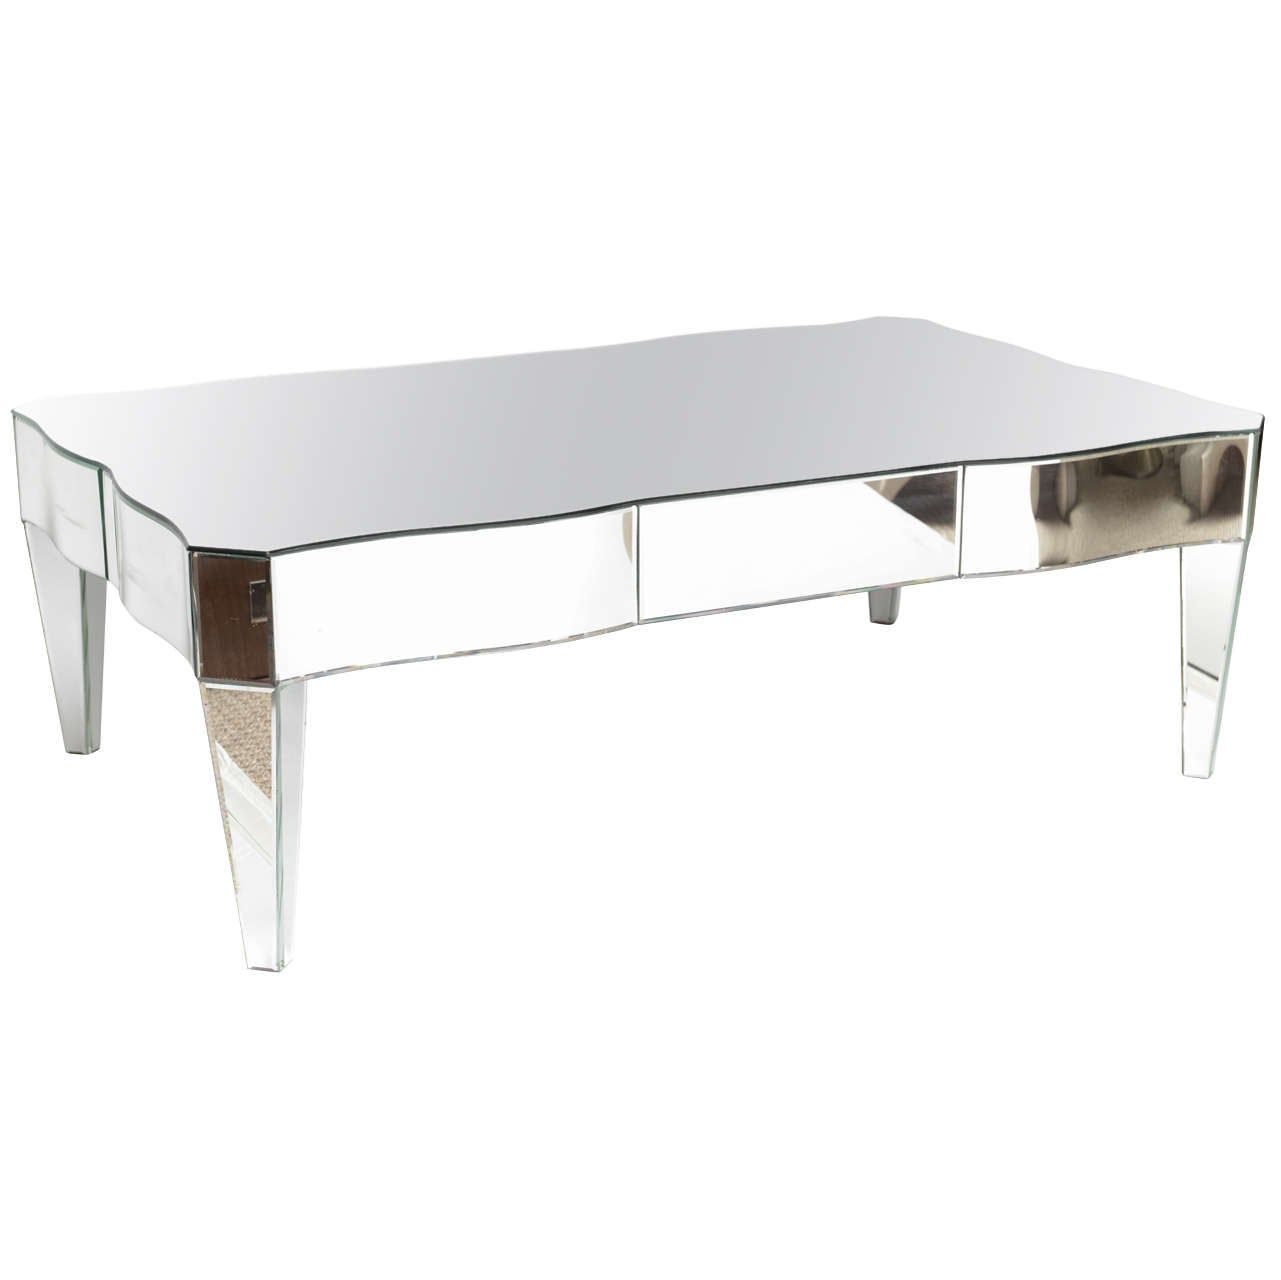 Hollywood Regency Style Mirrored Cocktail Table At 1stdibs Throughout Mirrored Cocktail Tables (View 5 of 15)